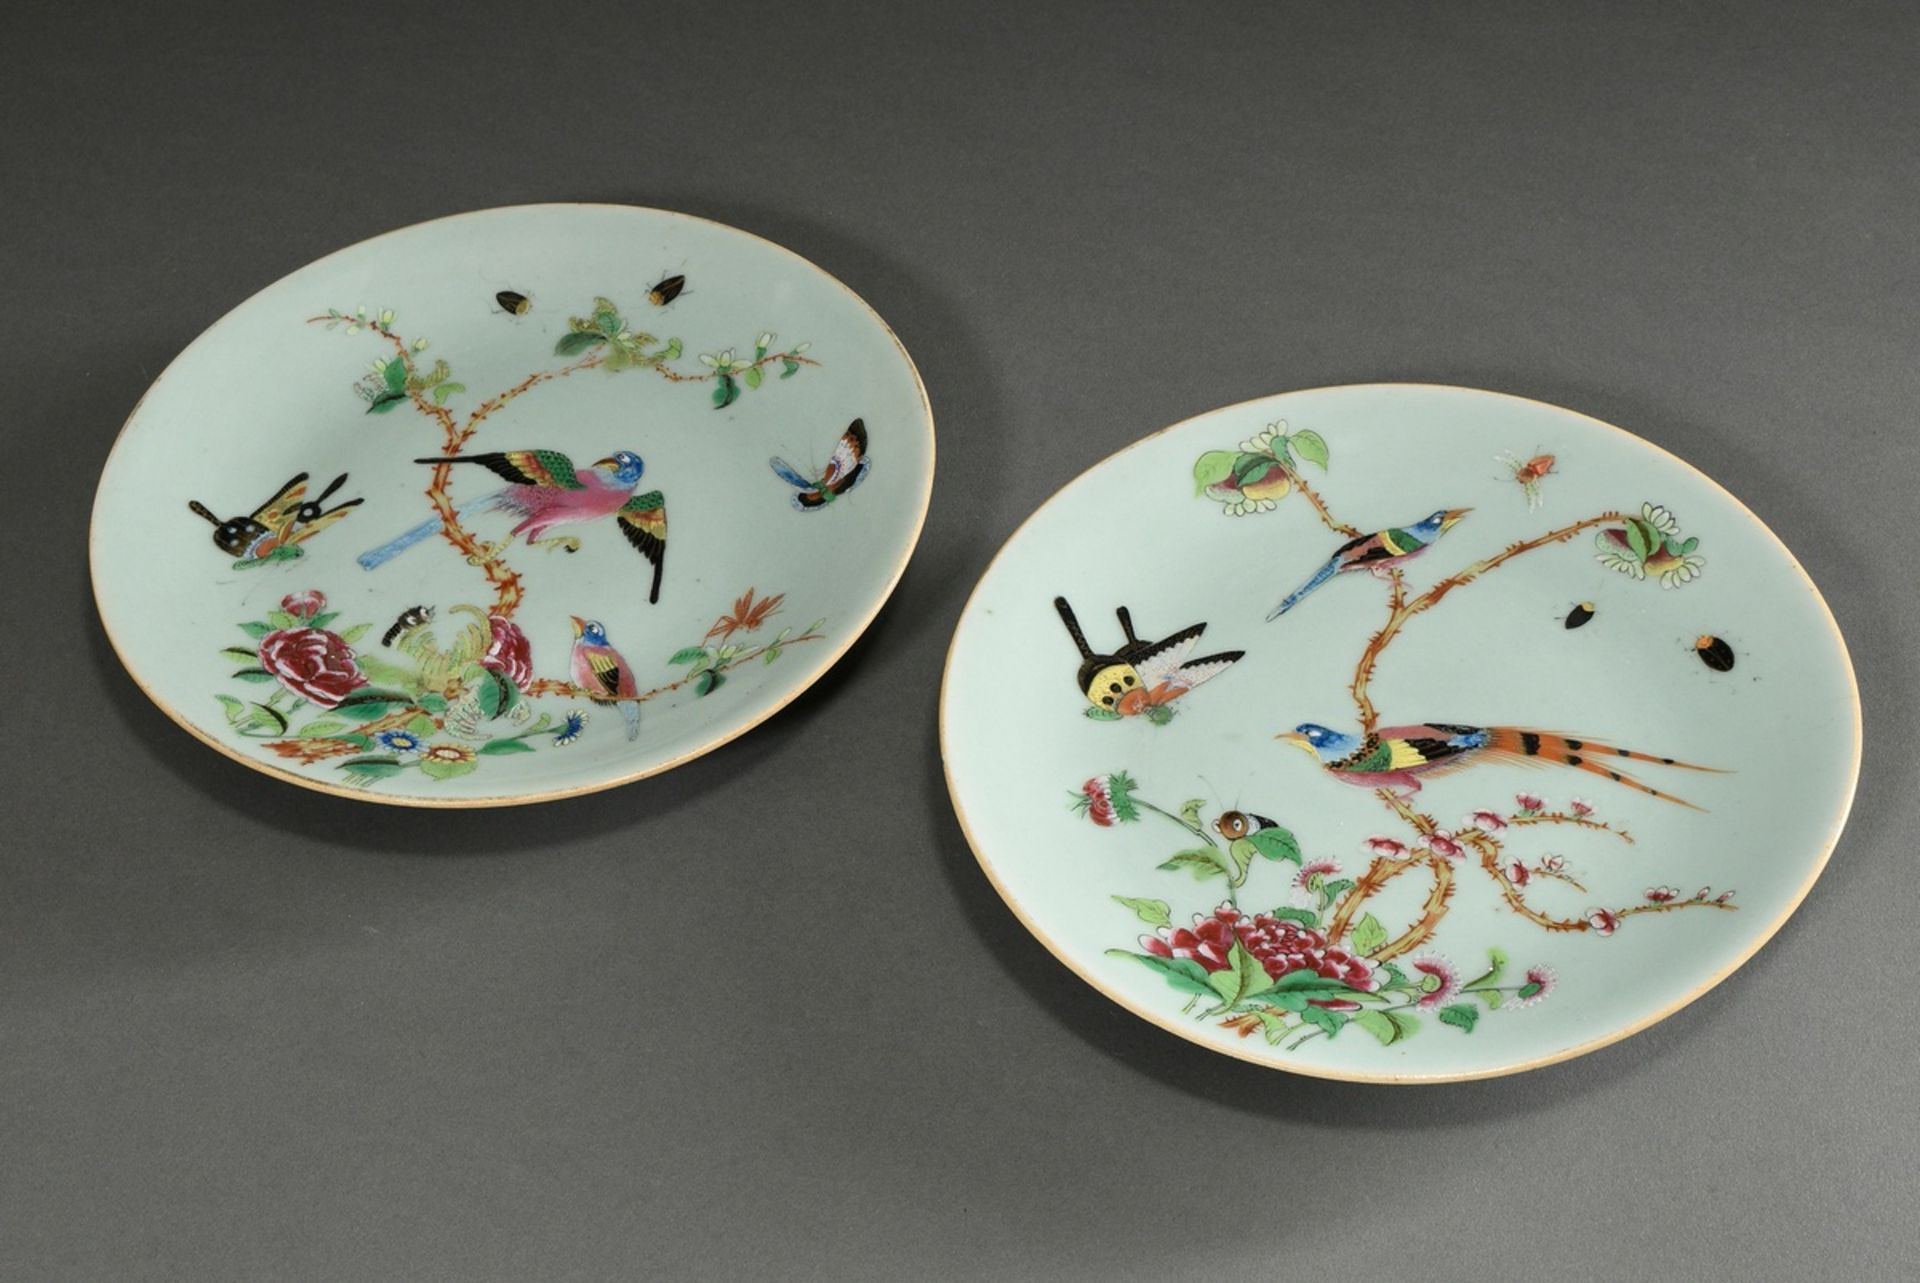 Pair of porcelain plates with polychrome enamel painting "Birds and Butterflies" on a delicate cela - Image 4 of 8